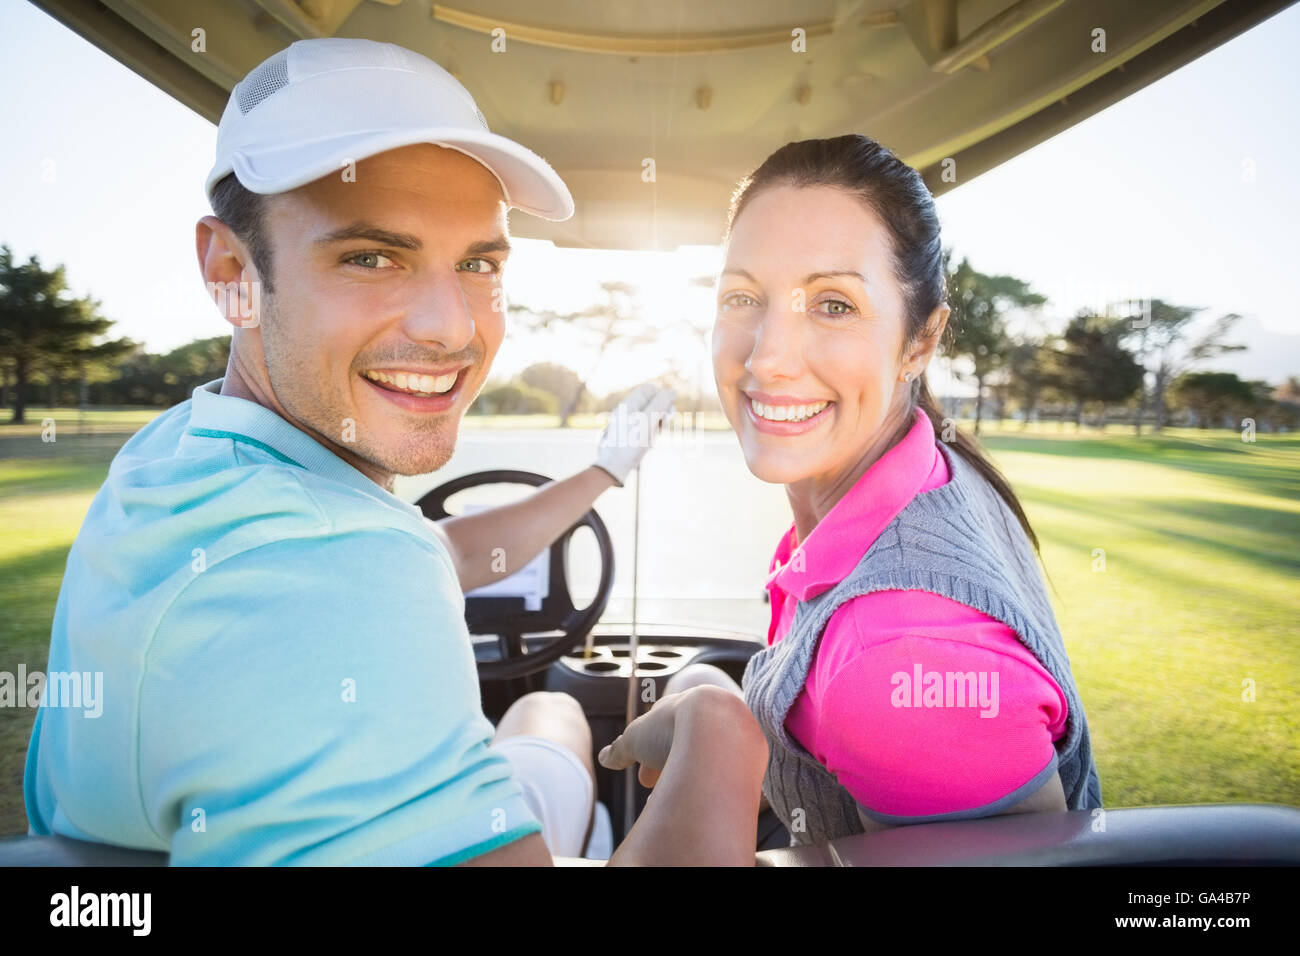 Cheerful couple sitting in golf golfeur bugggy Banque D'Images